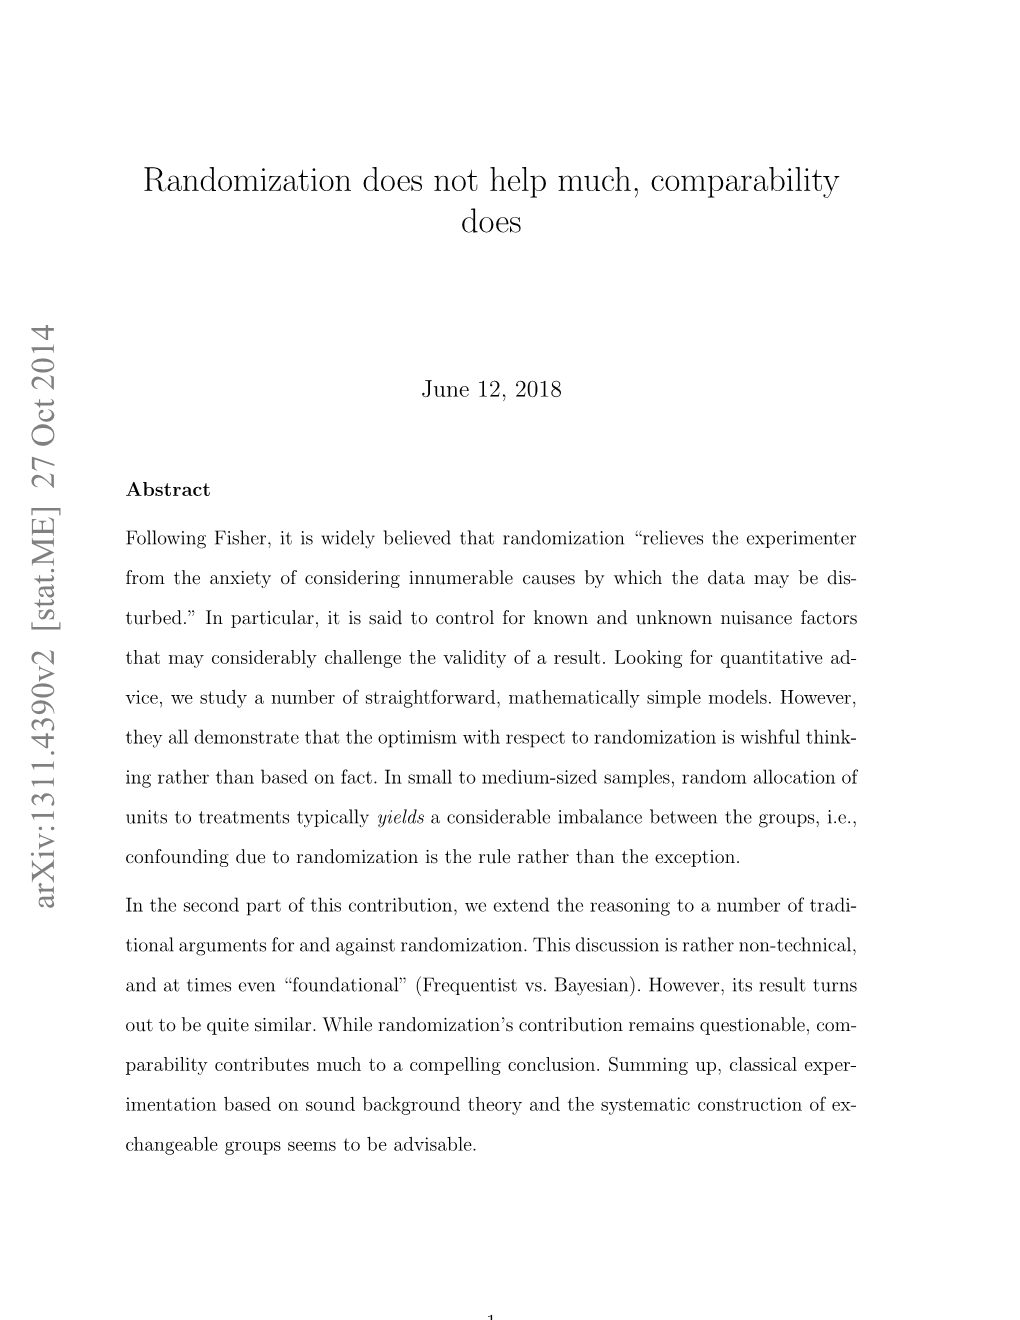 Randomization Does Not Help Much, Comparability Does